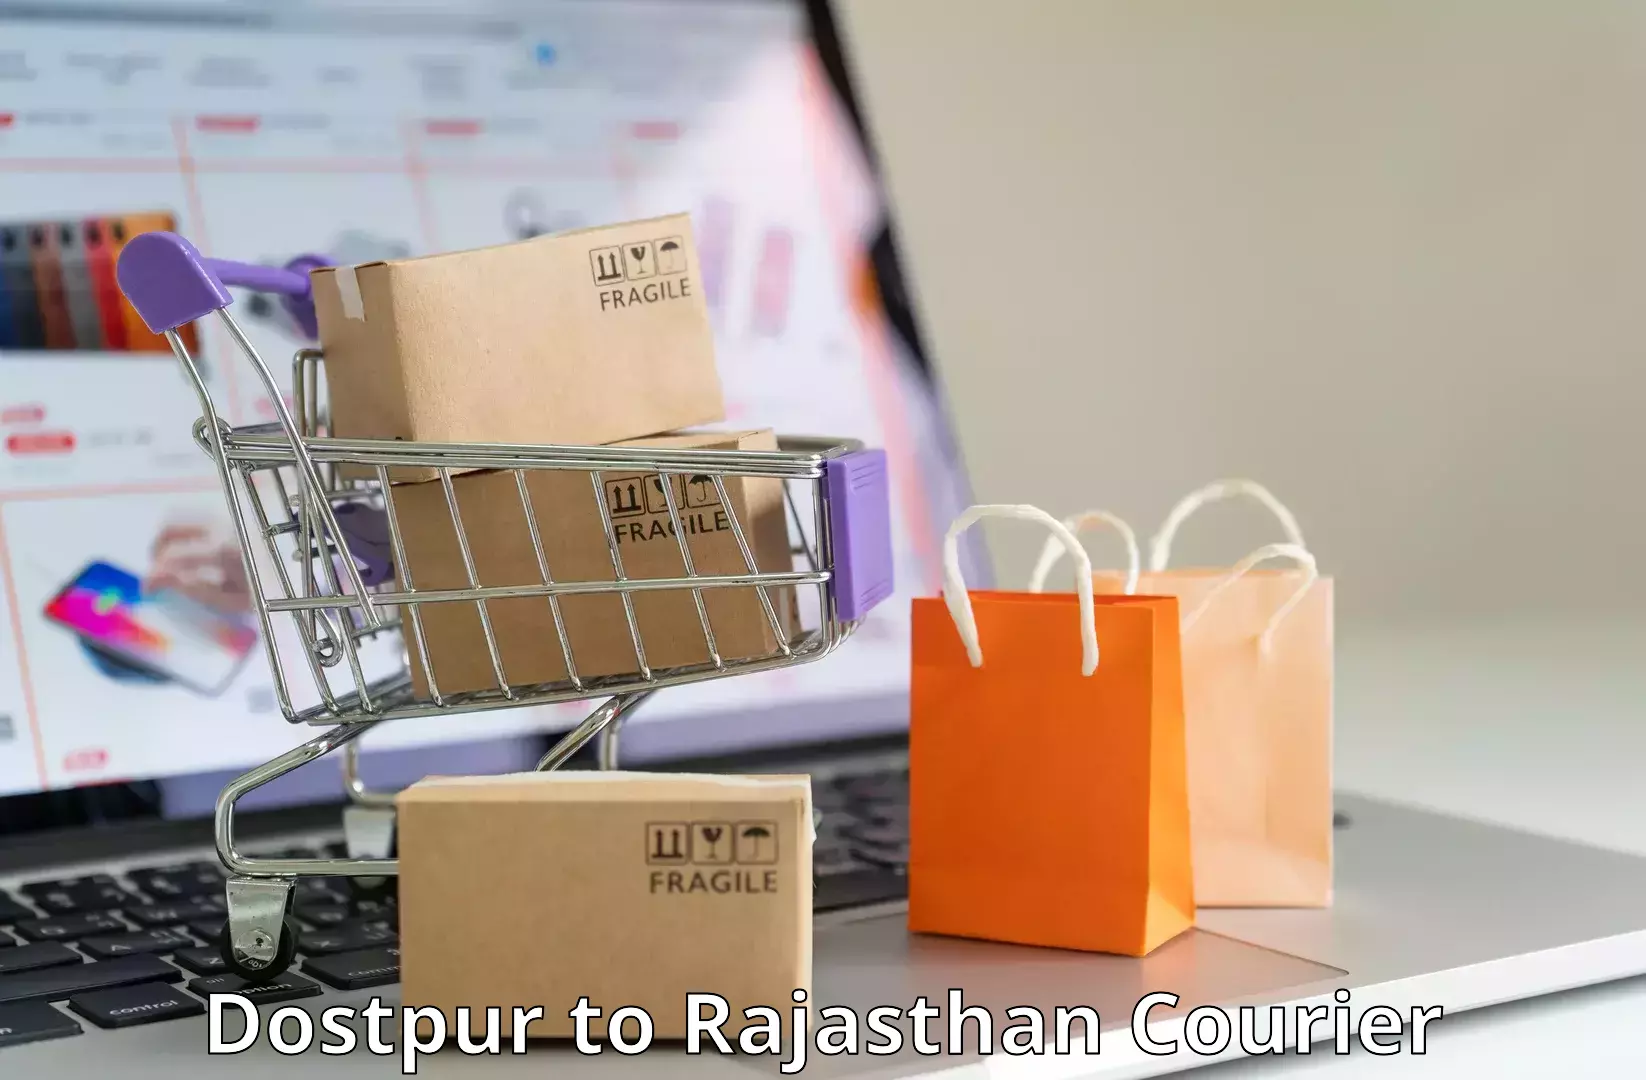 Same-day delivery solutions Dostpur to Mathania